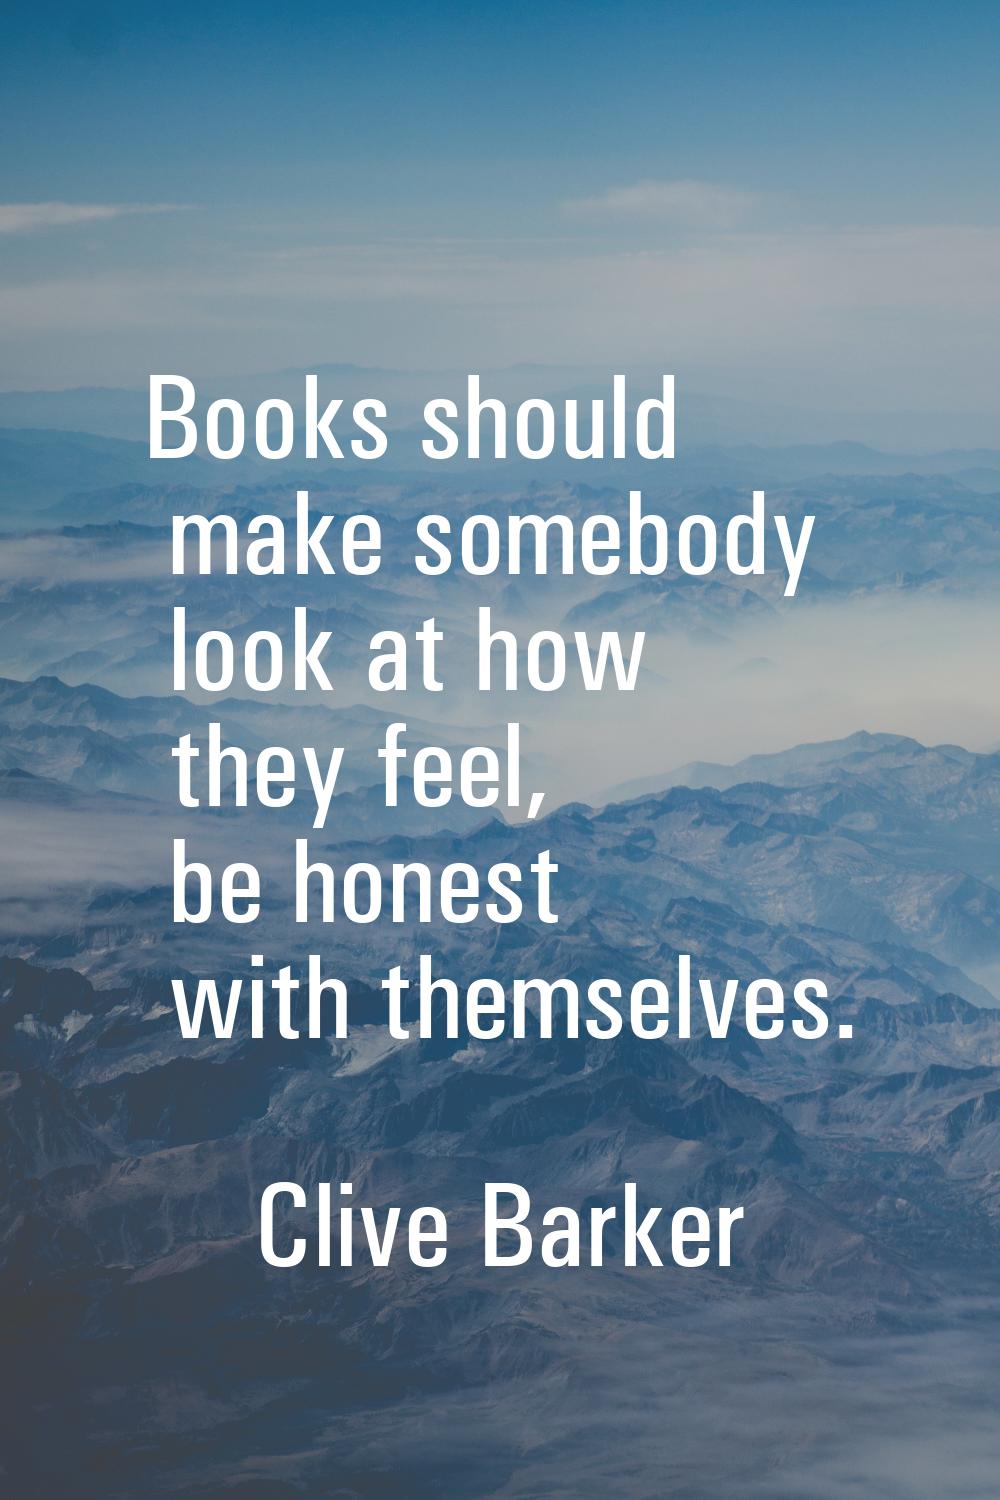 Books should make somebody look at how they feel, be honest with themselves.